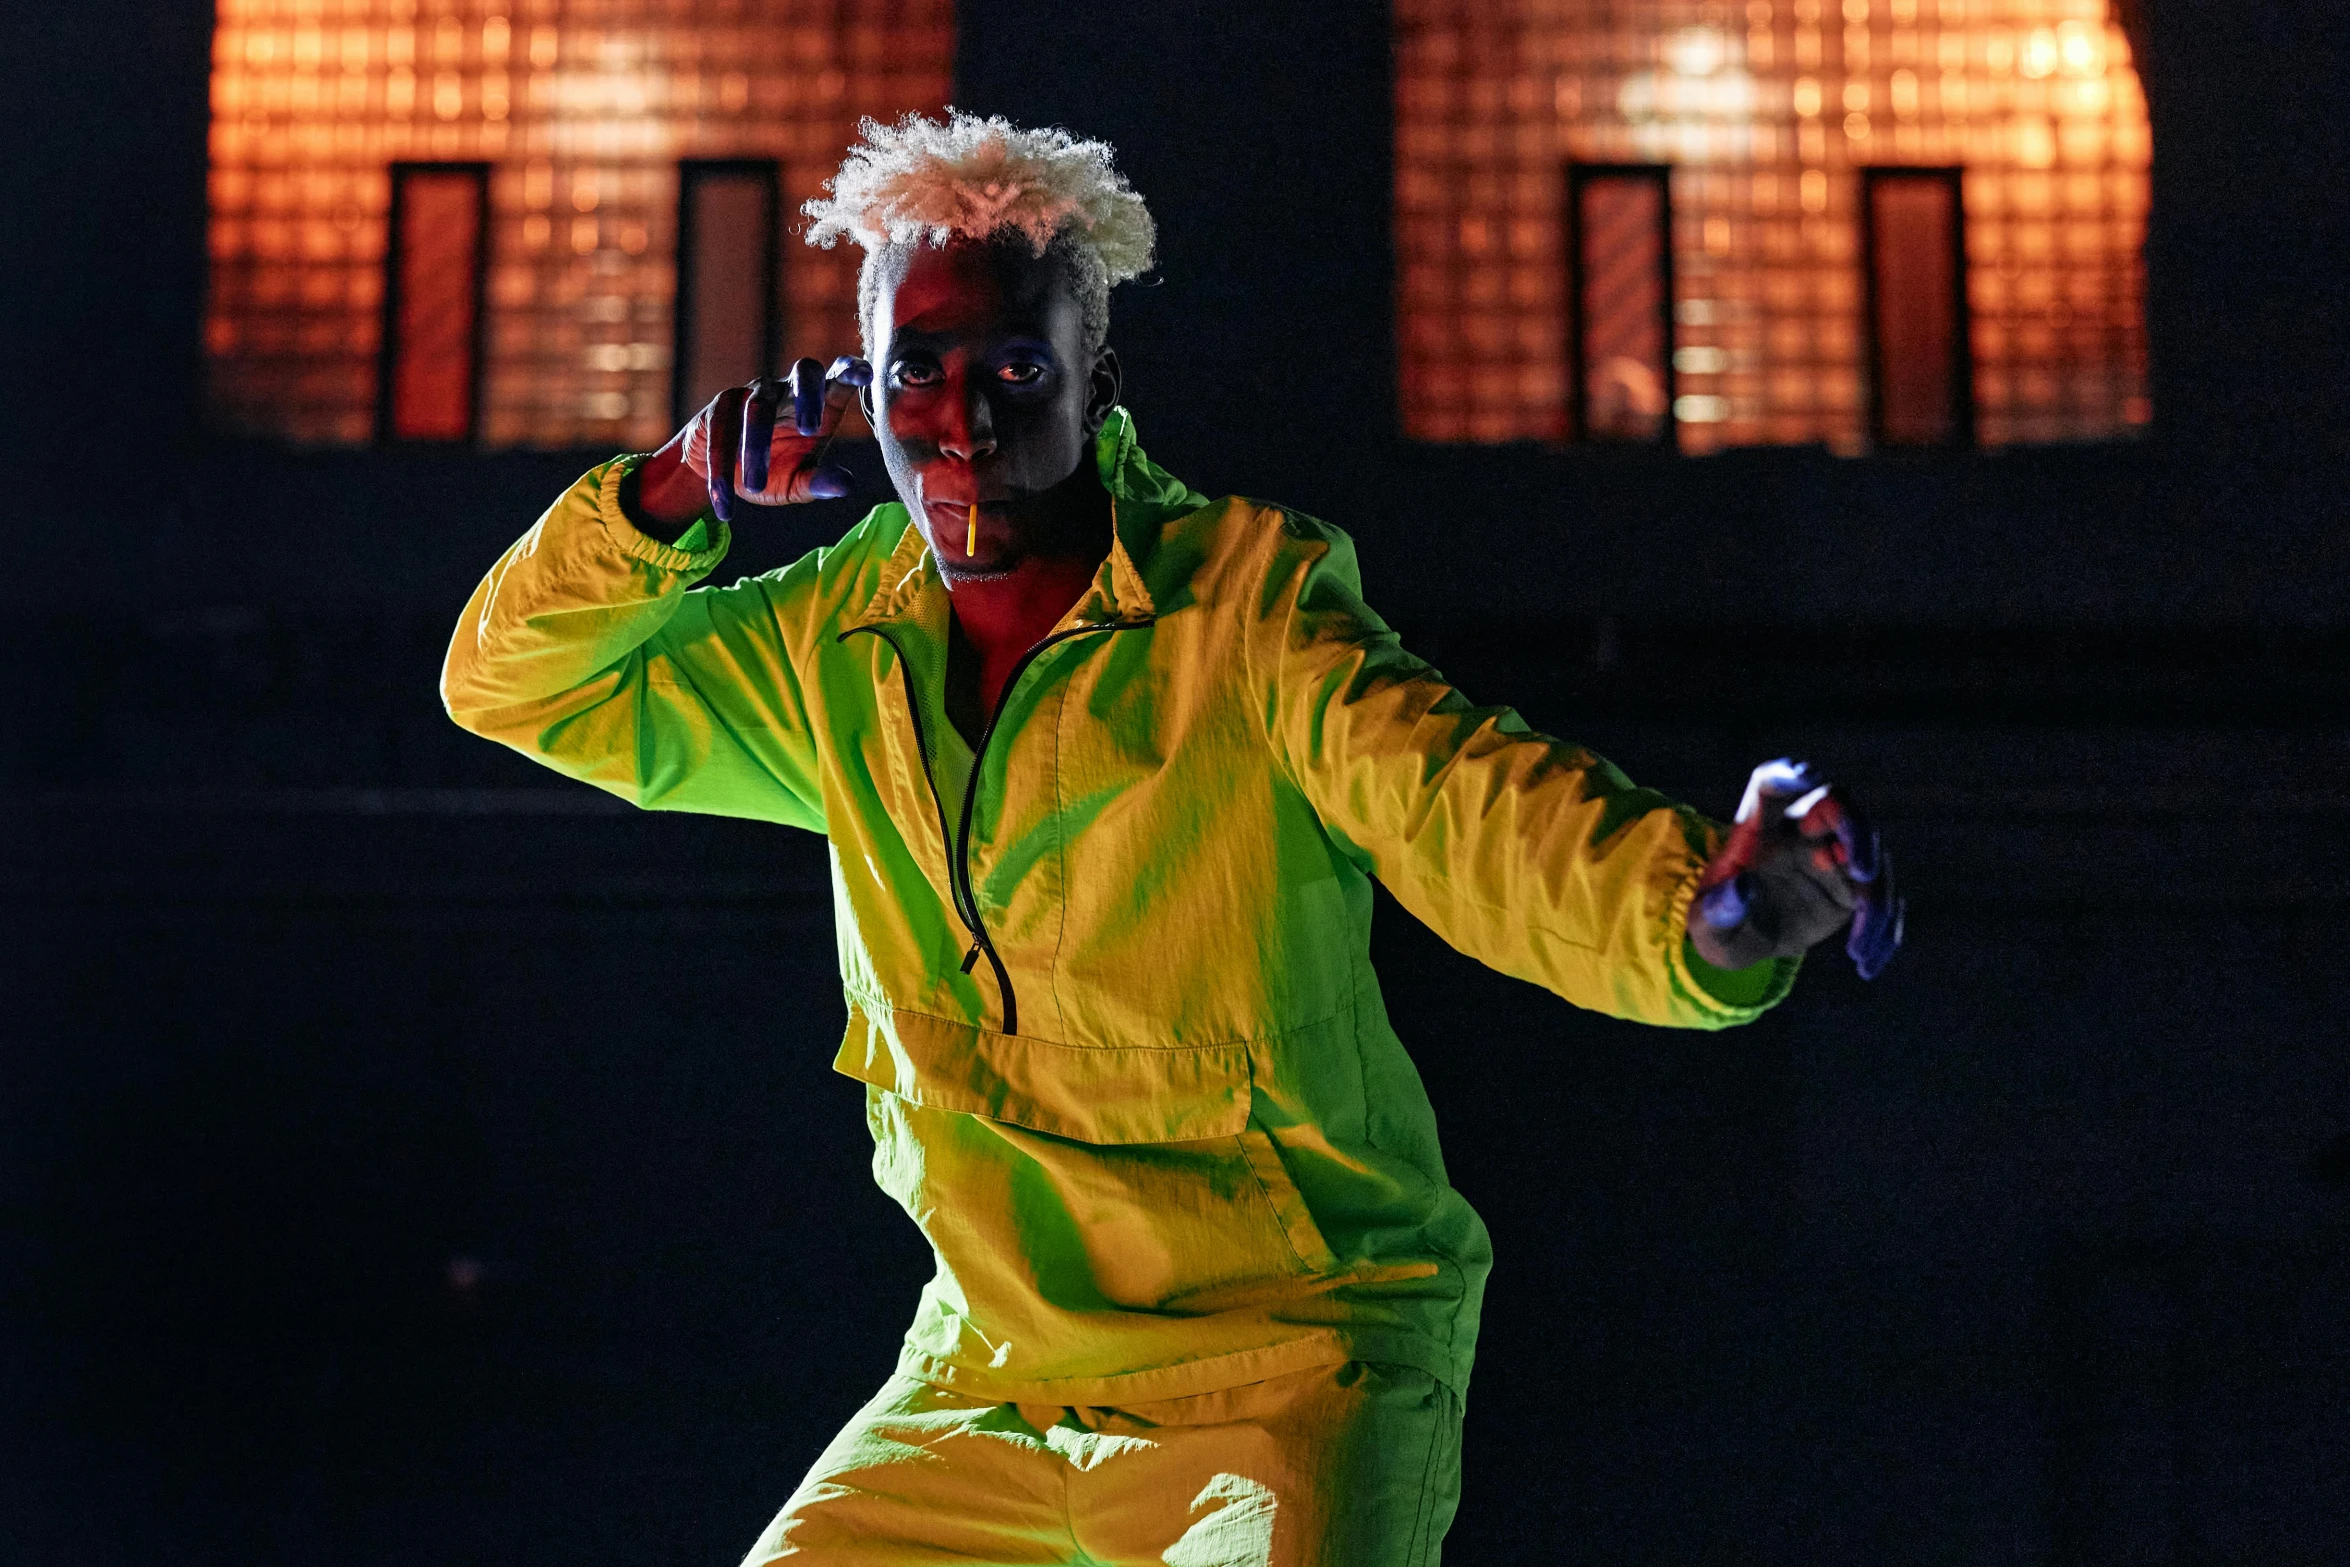 a man dressed as a clown doing tricks on a skateboard, an album cover, pexels, afrofuturism, yellow spiky hair, performing on stage, chappie in an adidas track suit, avatar image